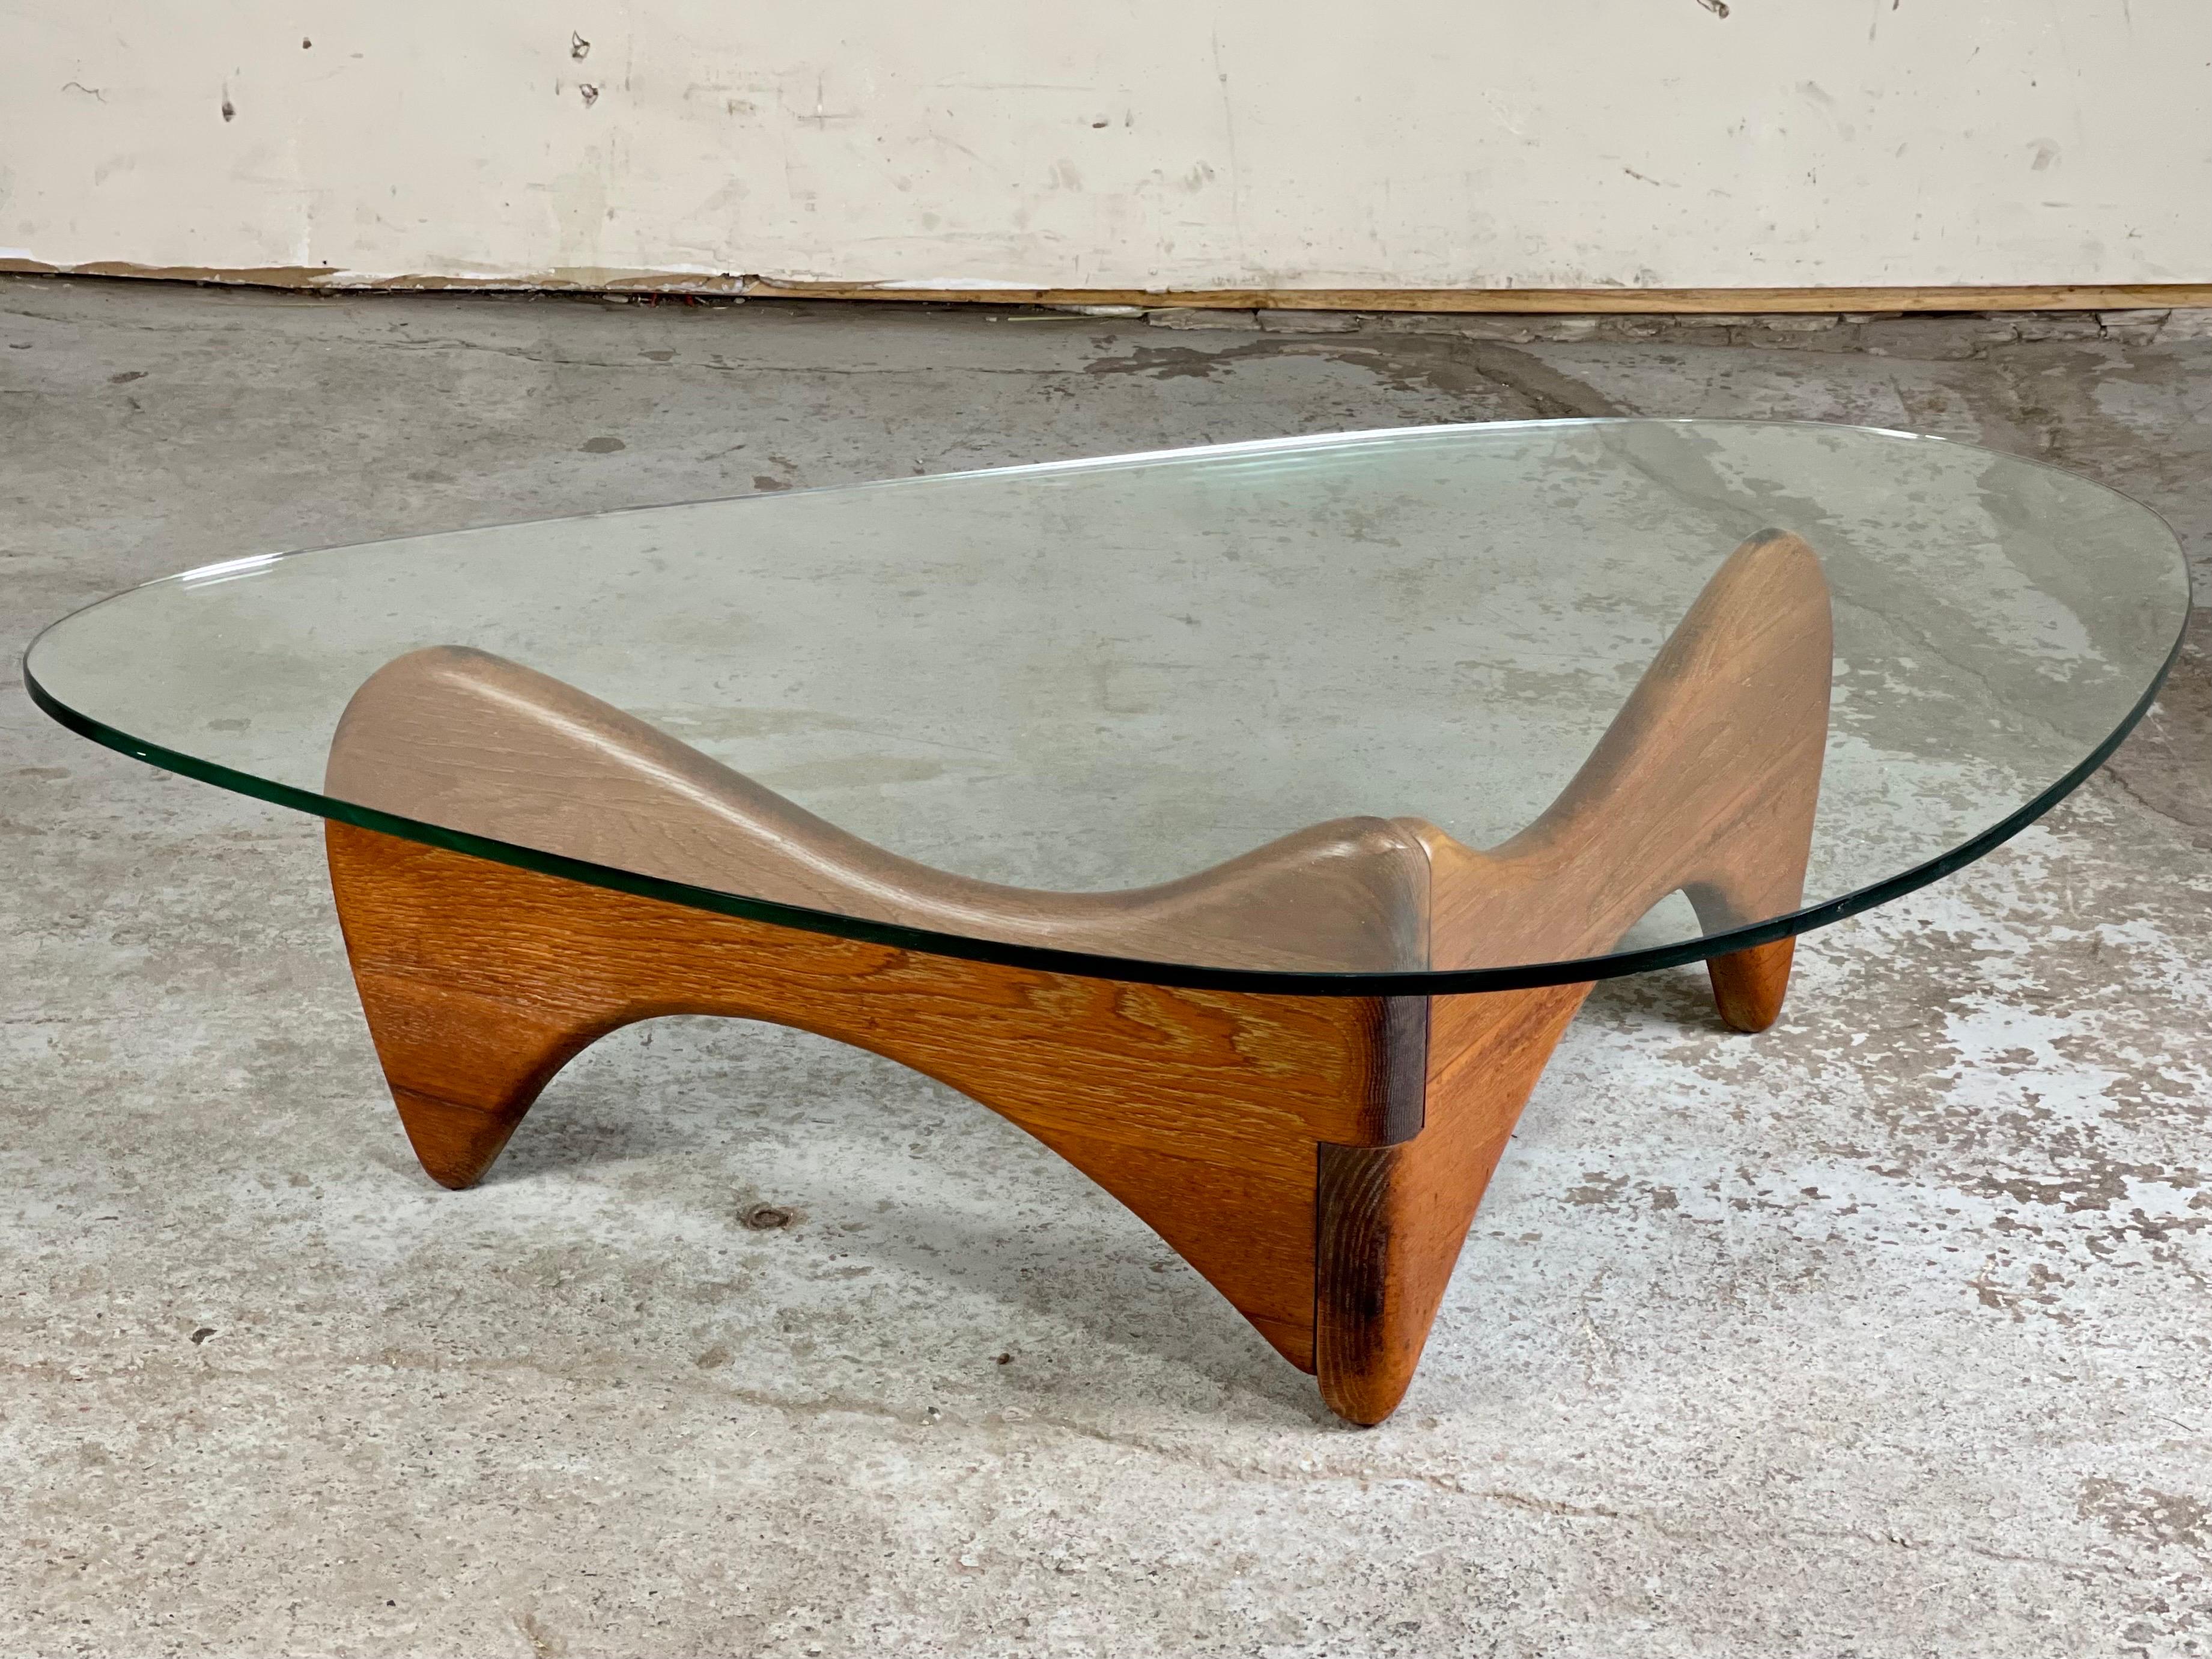 Excellent studio made sculptural solid teak coffee table drenched with a blanket of rich patina - after Isamu Noguchi. There are different forms by this maker and I have yet to see any credible attribution. Whomever it was - did great work. The